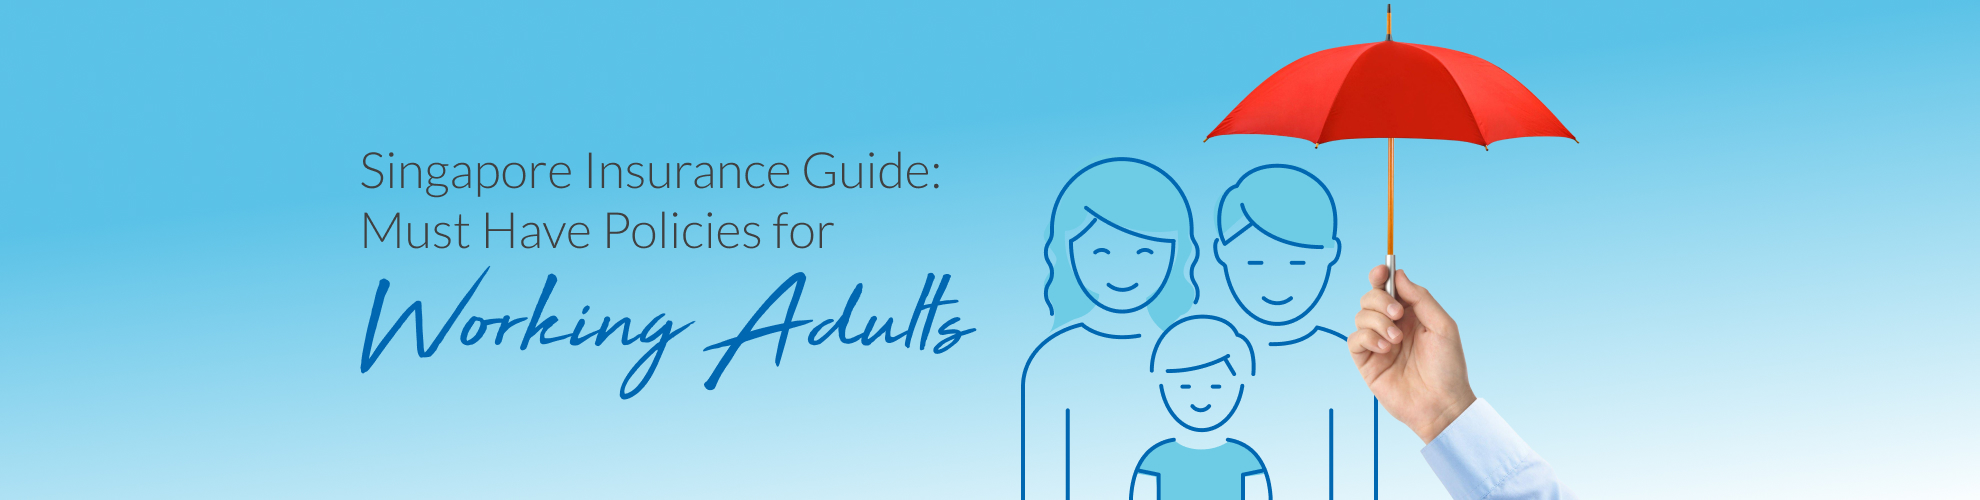 Singapore Insurance Guide by RHB